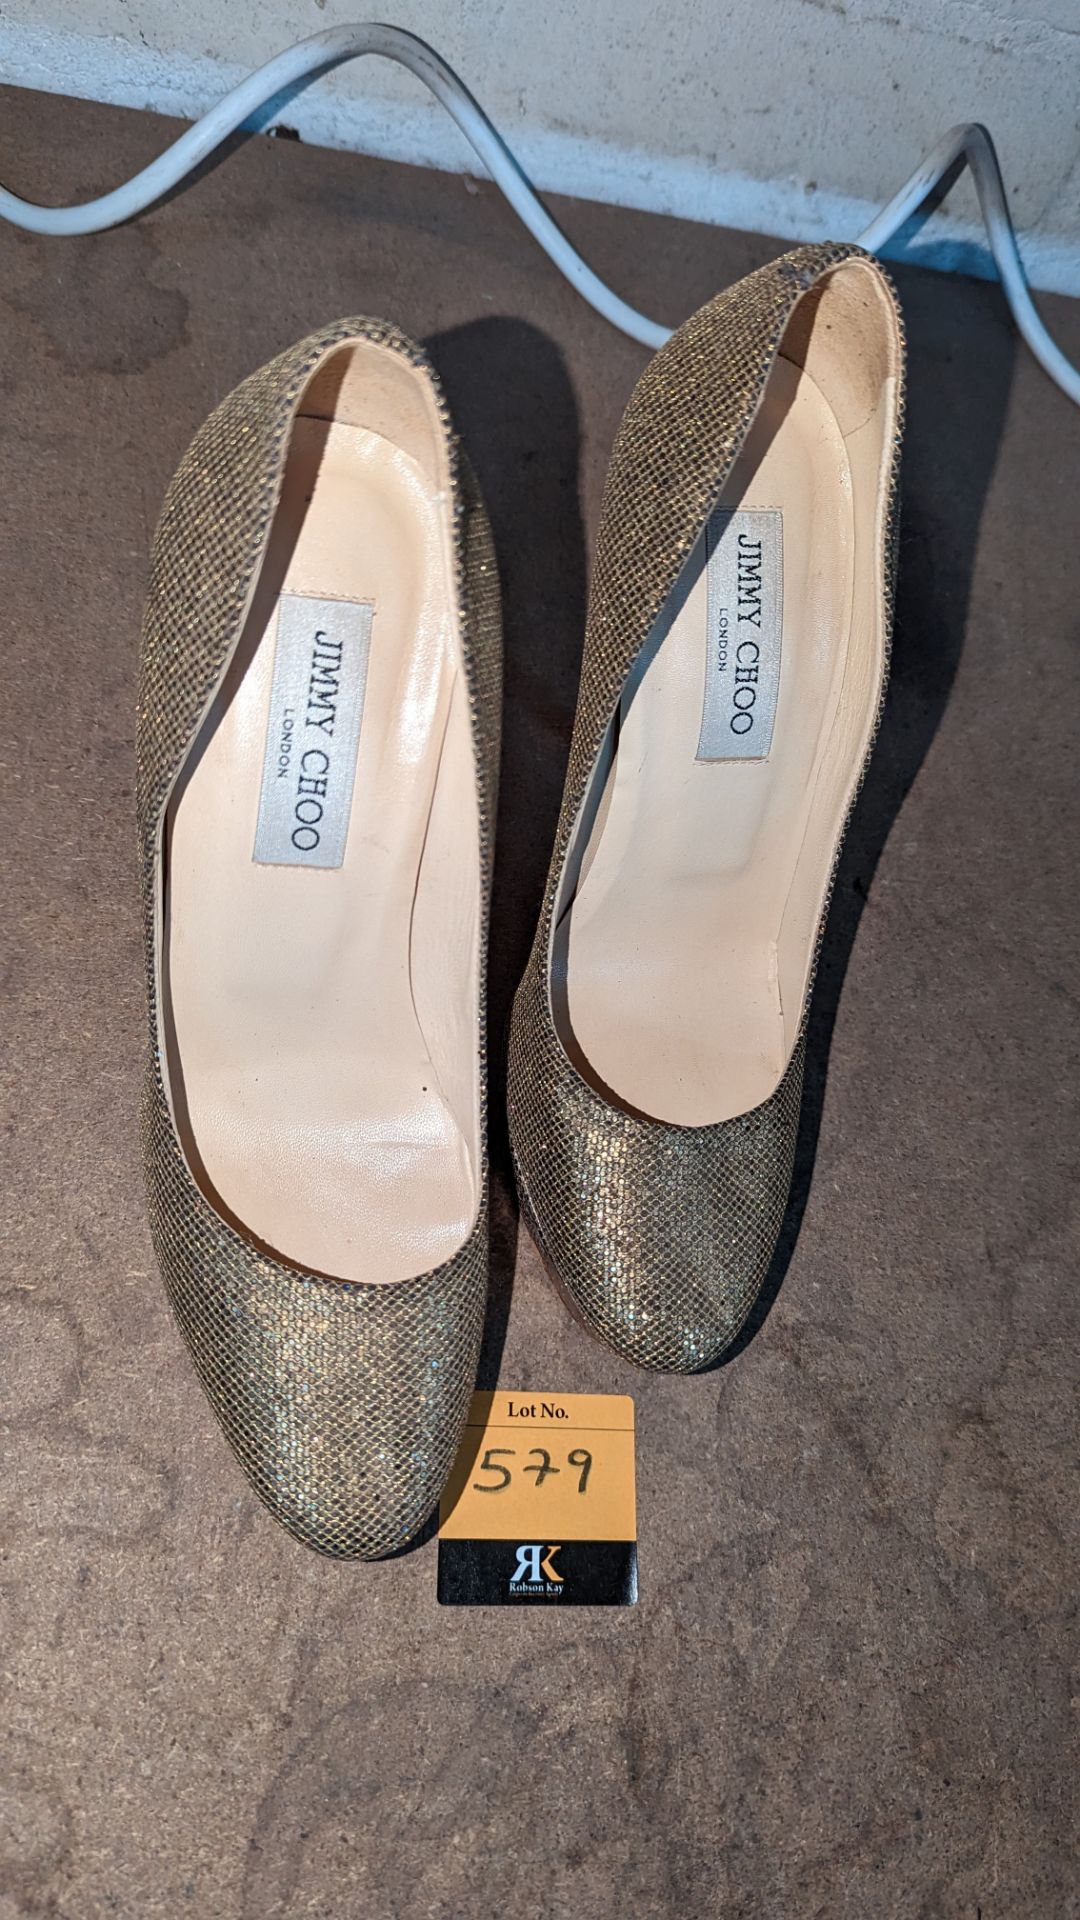 Pair of Jimmy Choo ladies shoes in gold, size 39 - Image 3 of 5